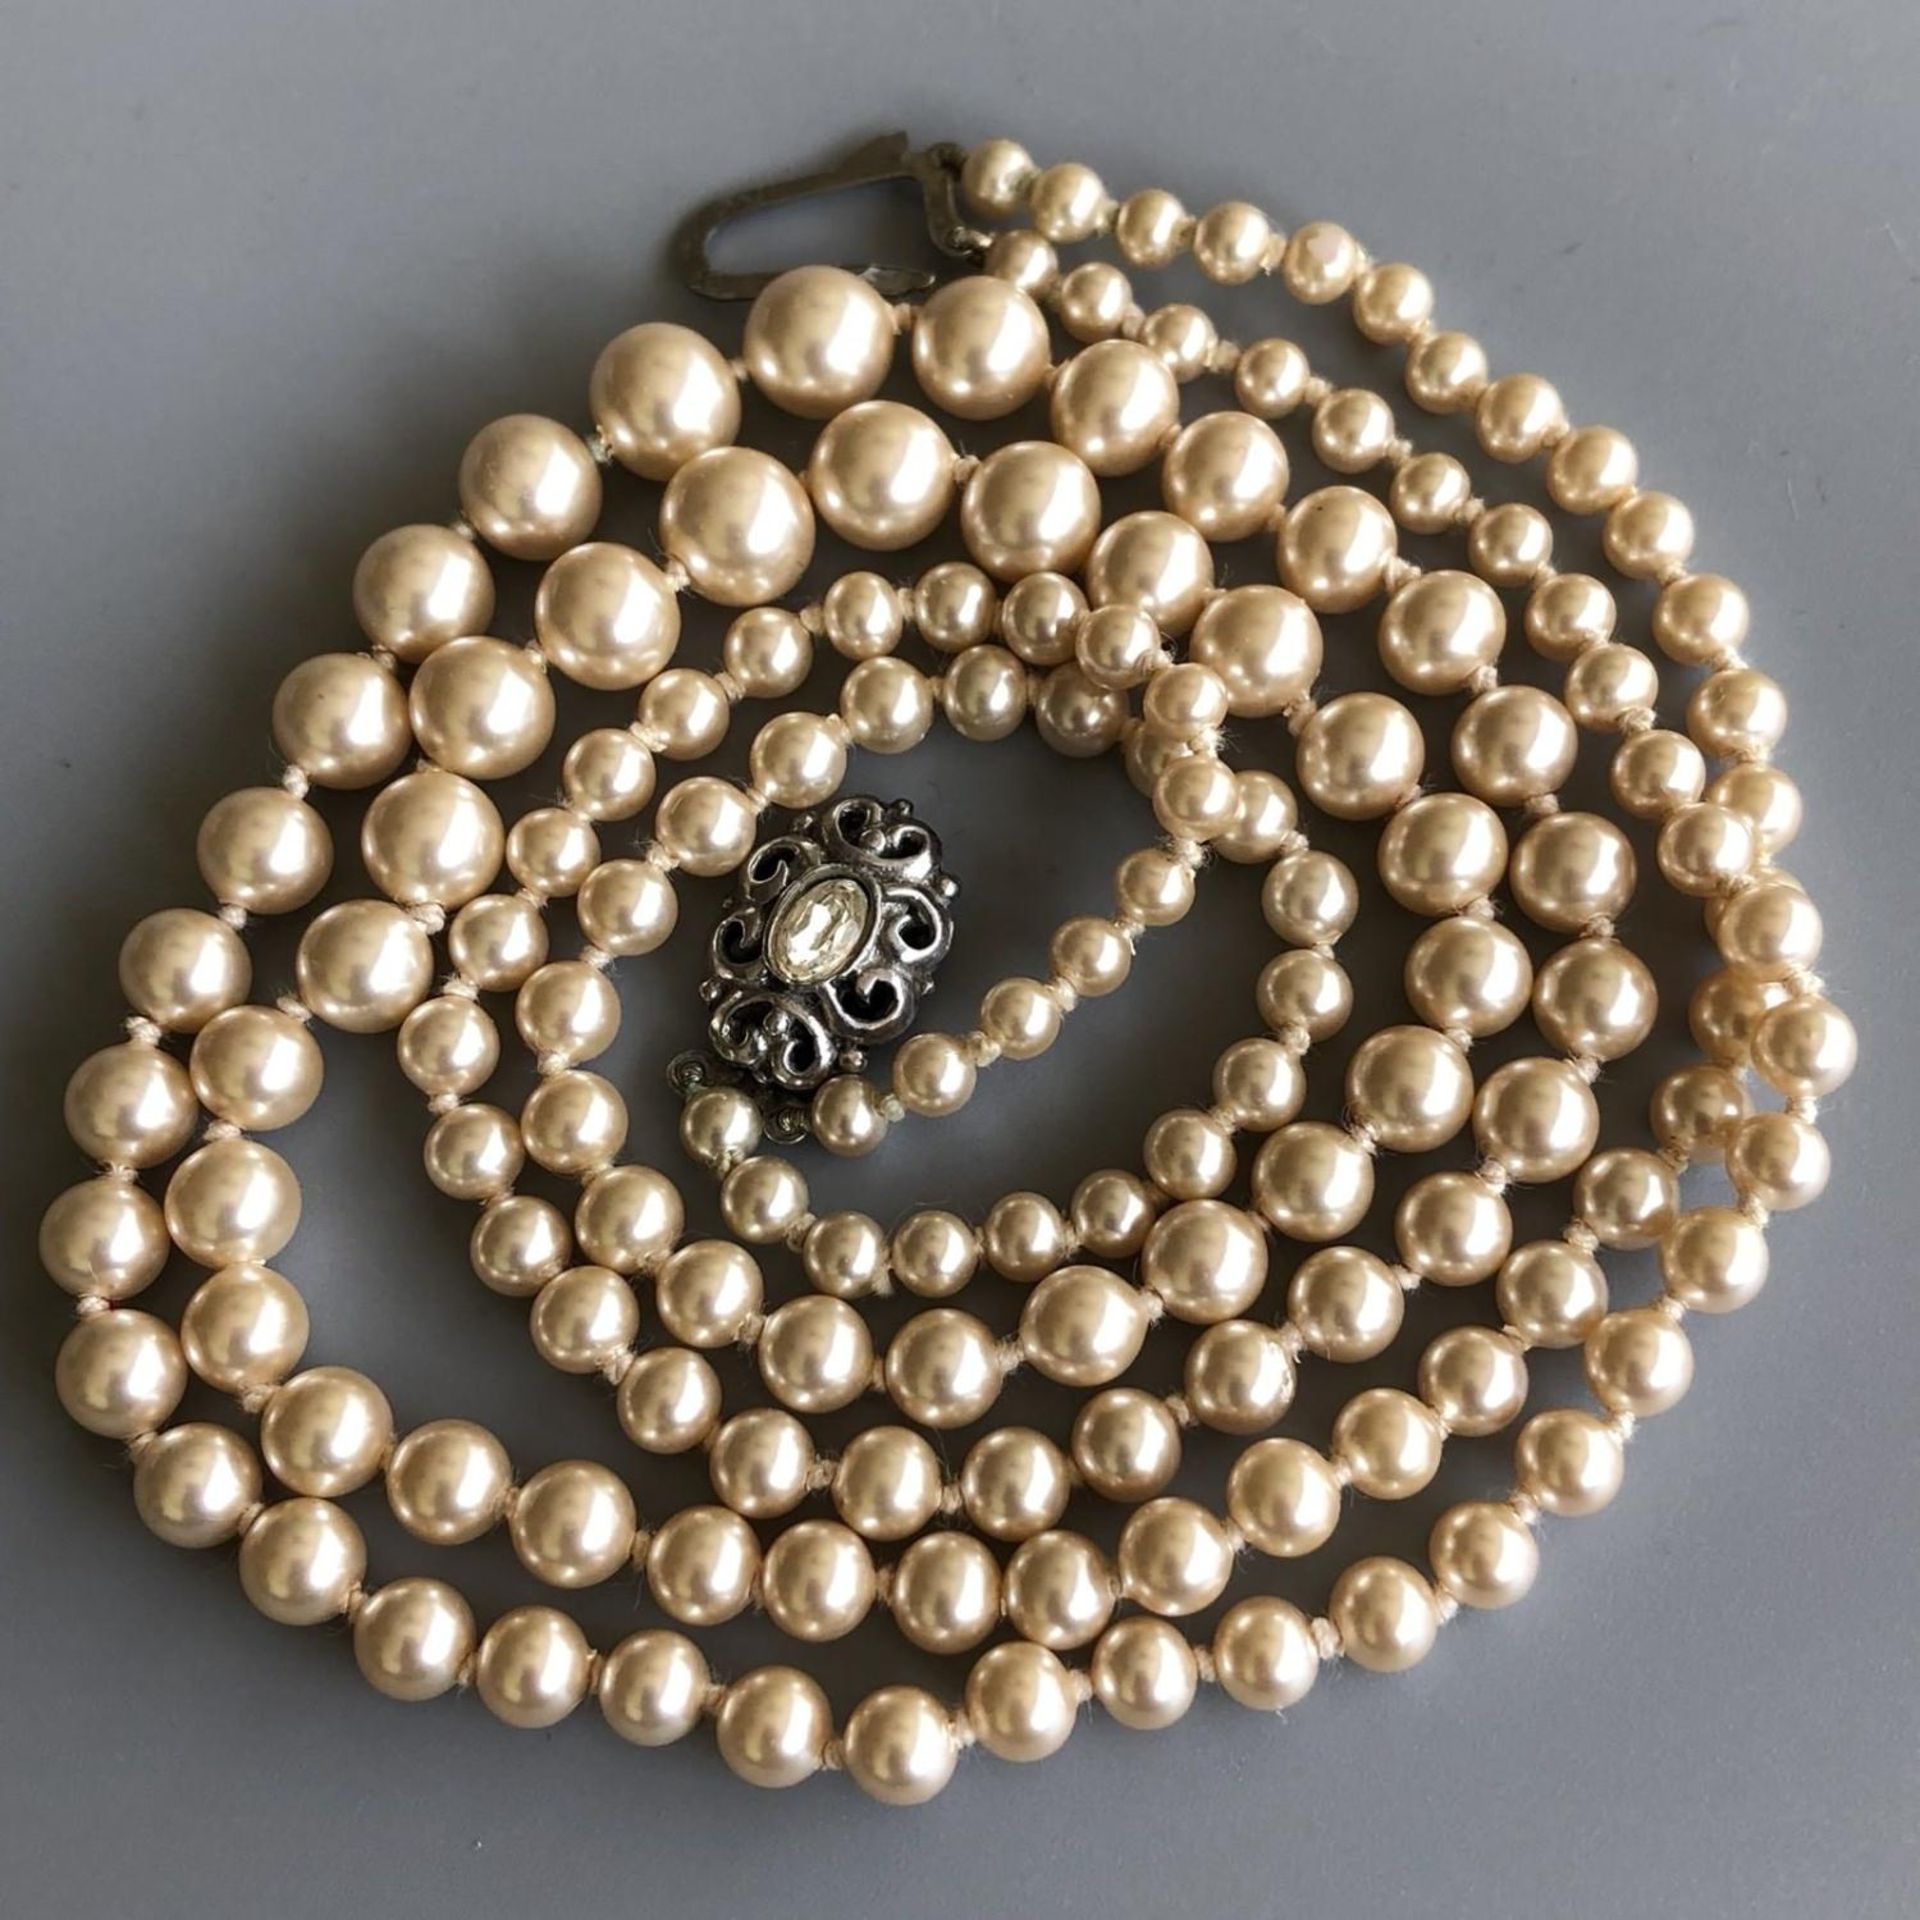 Fine quality vintage faux pearl twin strand 16" necklace with solid SILVER clasp - Image 4 of 5